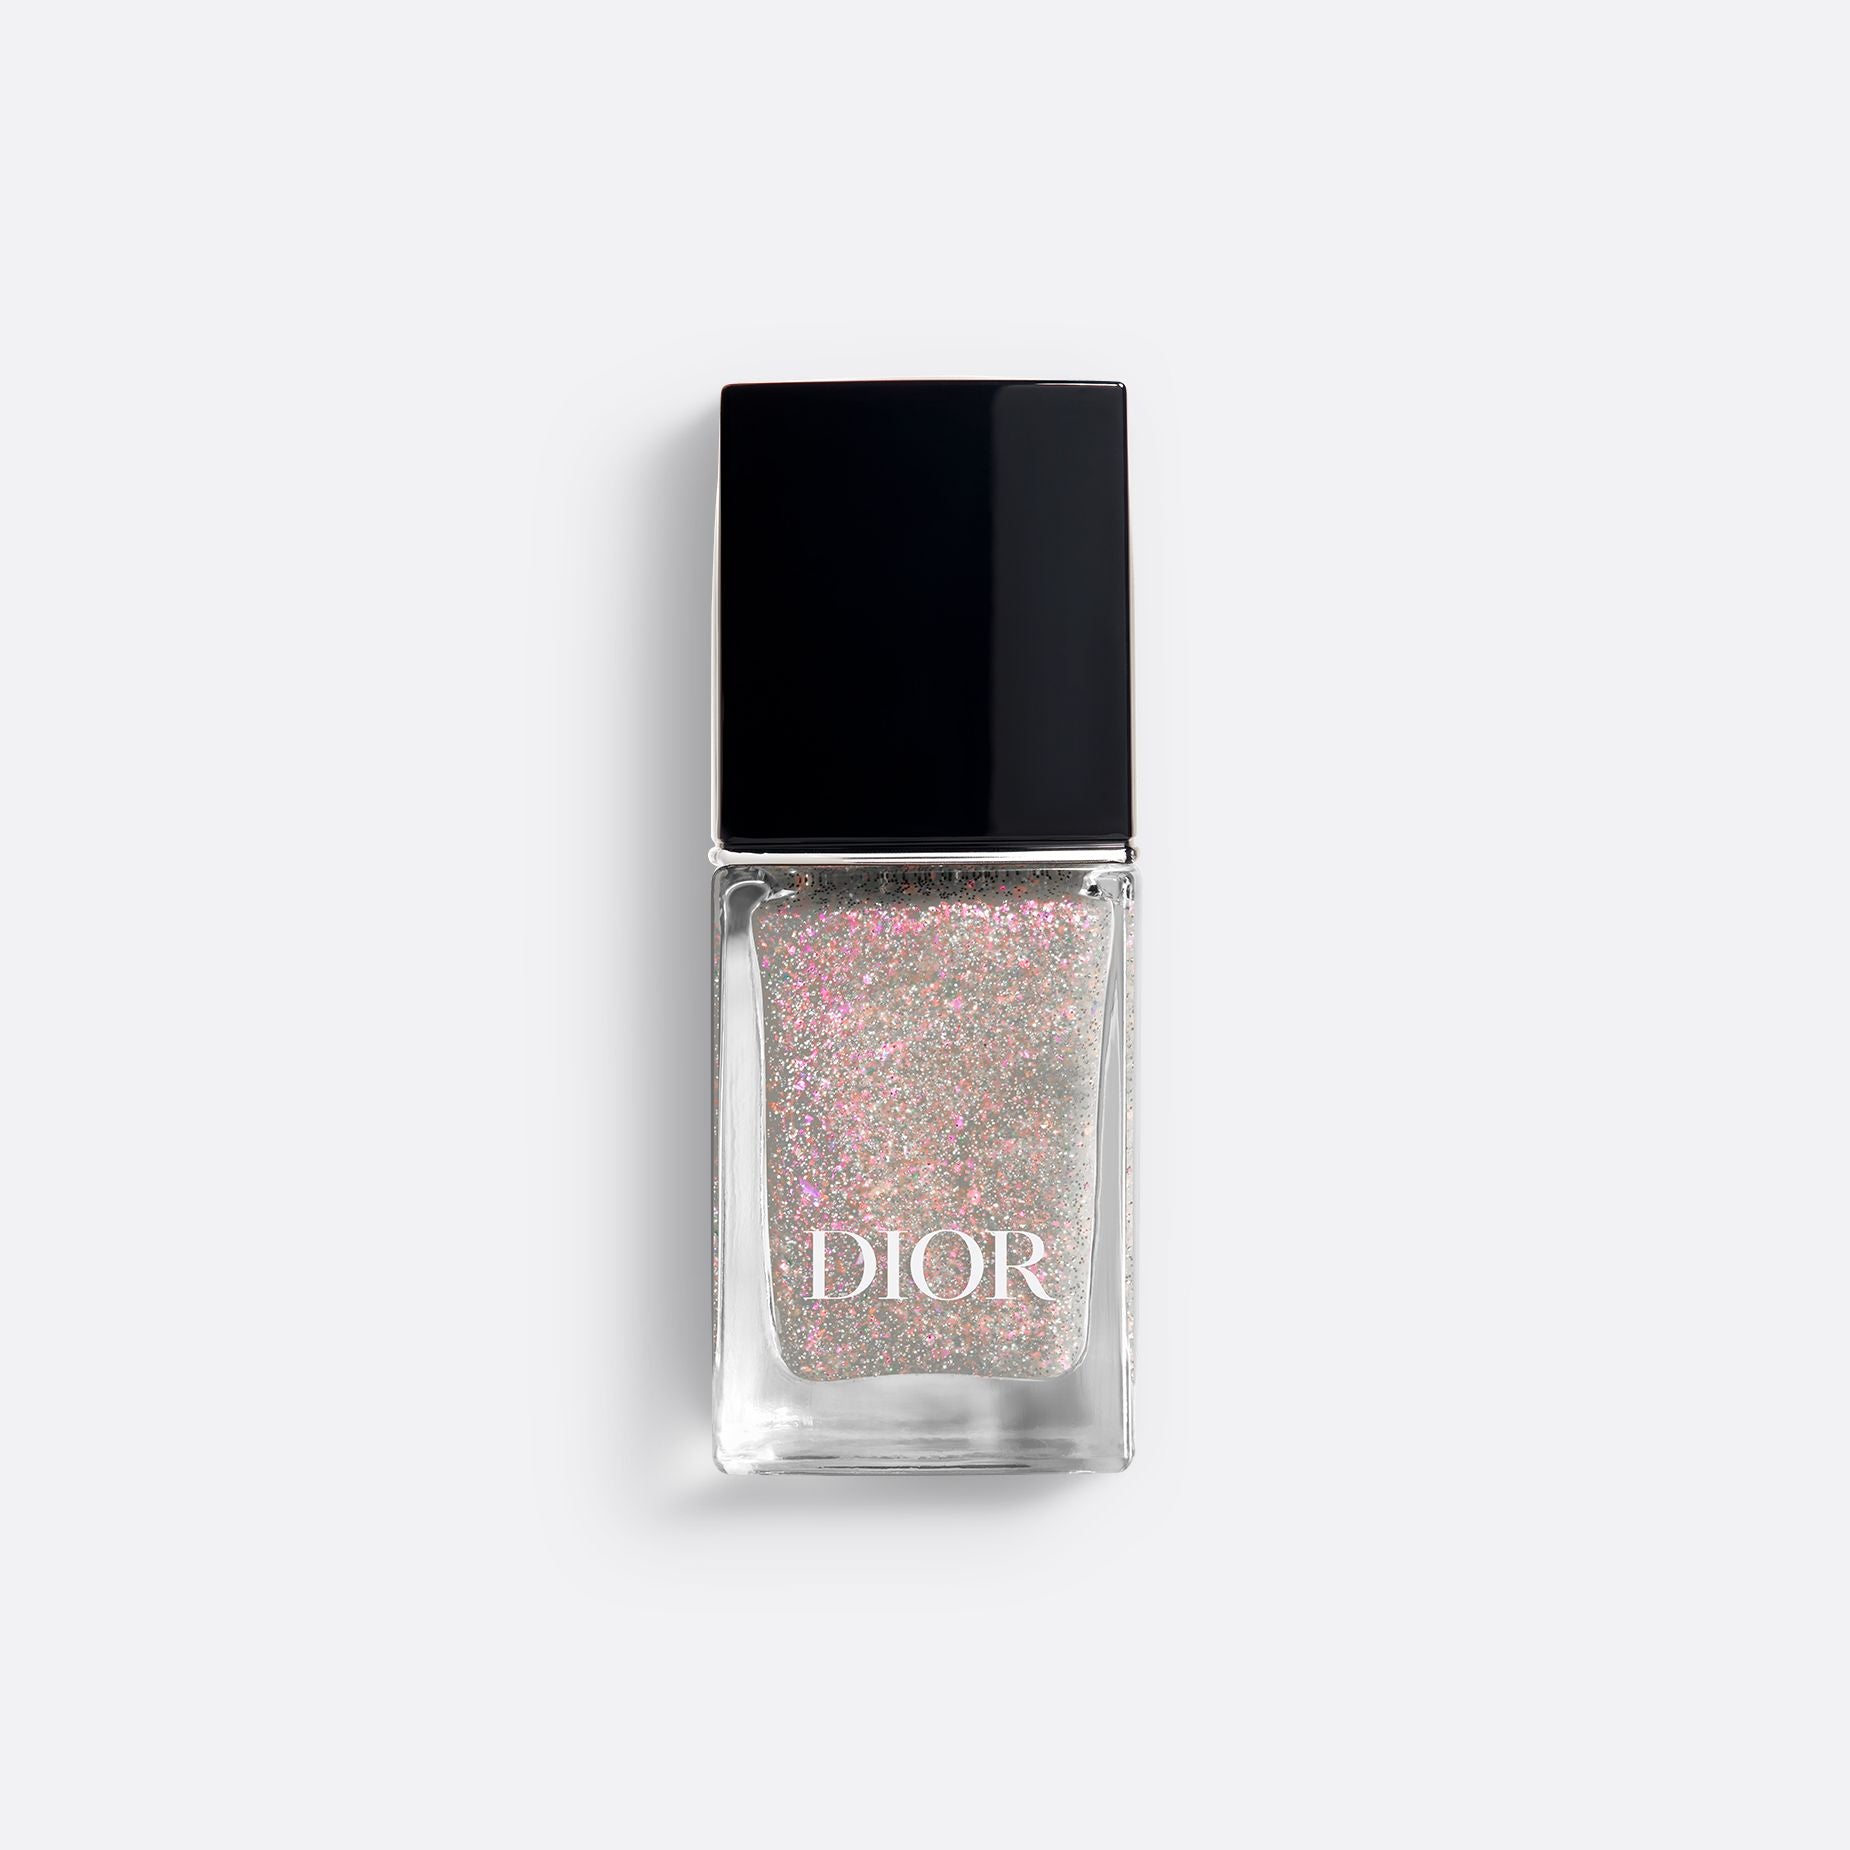 DIOR VERNIS TOP COAT - SPRING LIMITED EDITION ~ Glittery Top Coat Lacquer